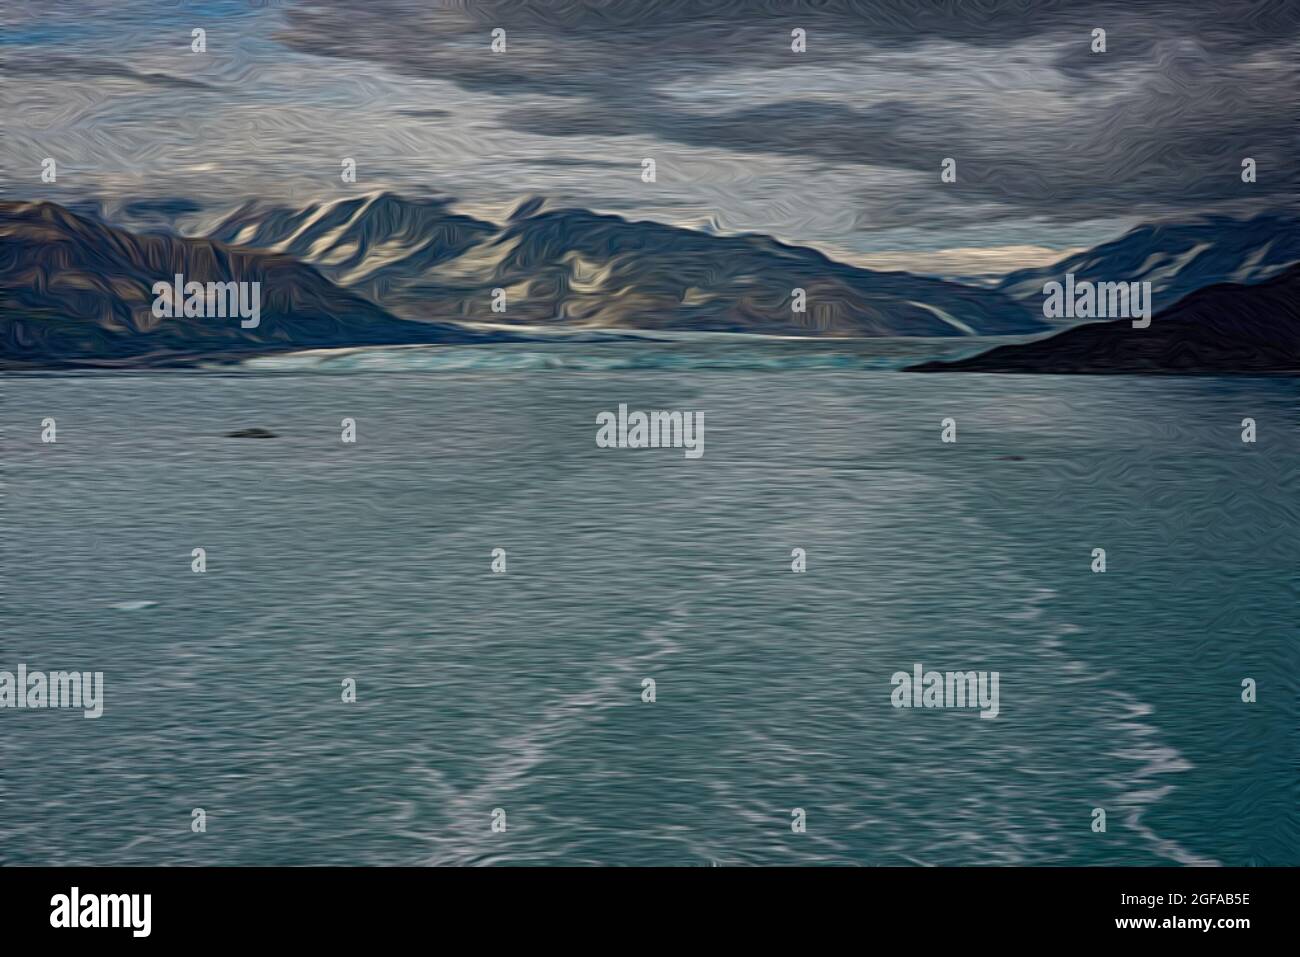 An illustration of the wake of a cruise ship sailing away from Hubbard Glacier with a view of the glacier and mountains. Stock Photo